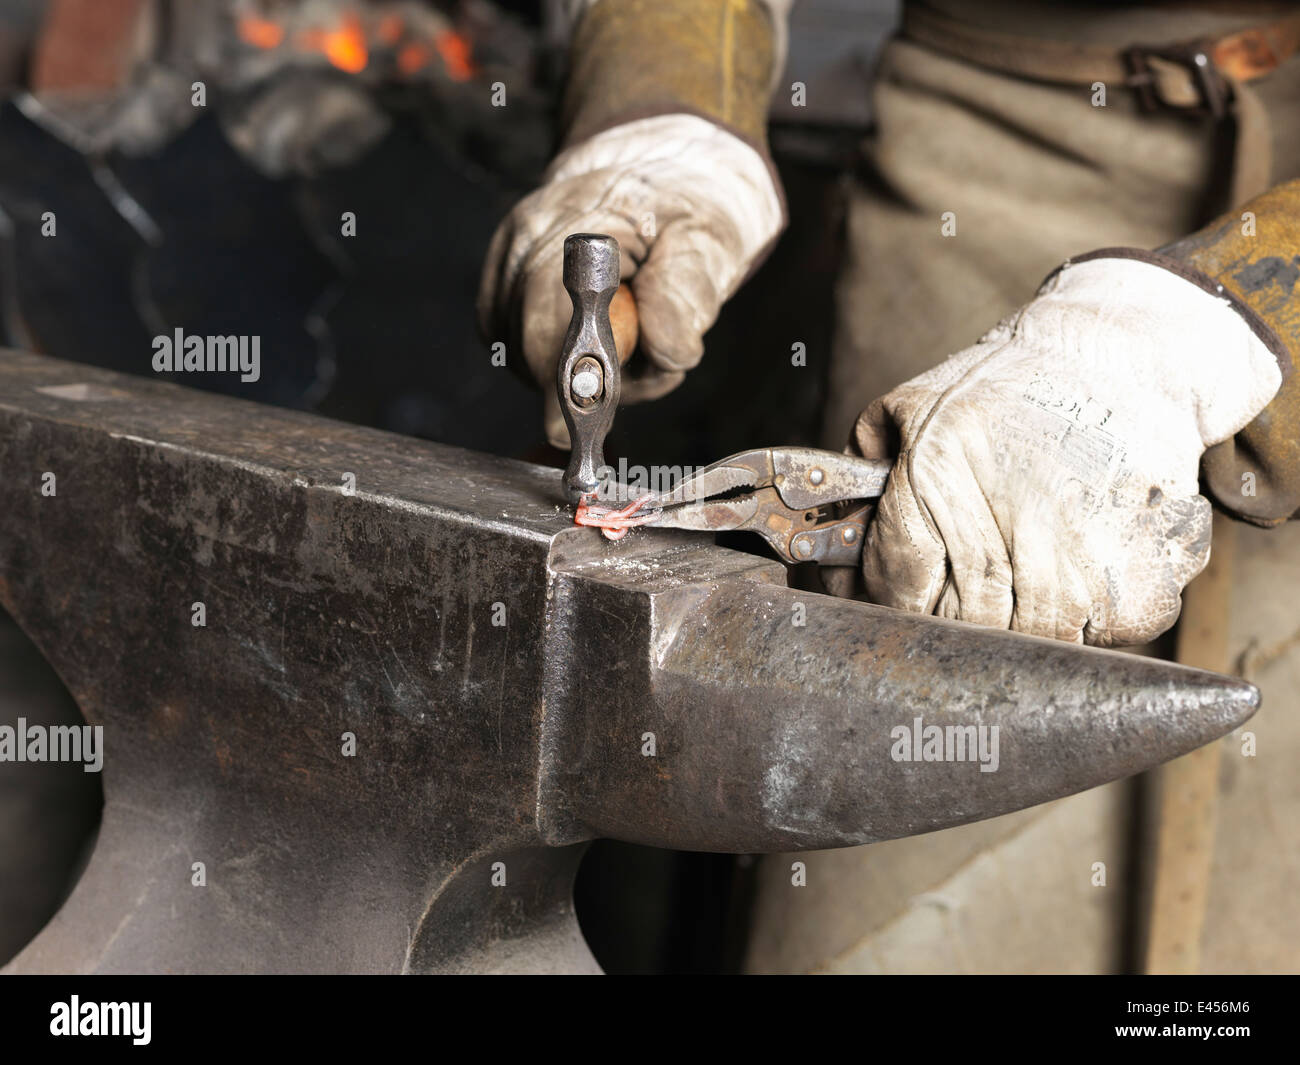 Cropped image of blacksmiths hands hammering red hot metal Stock Photo